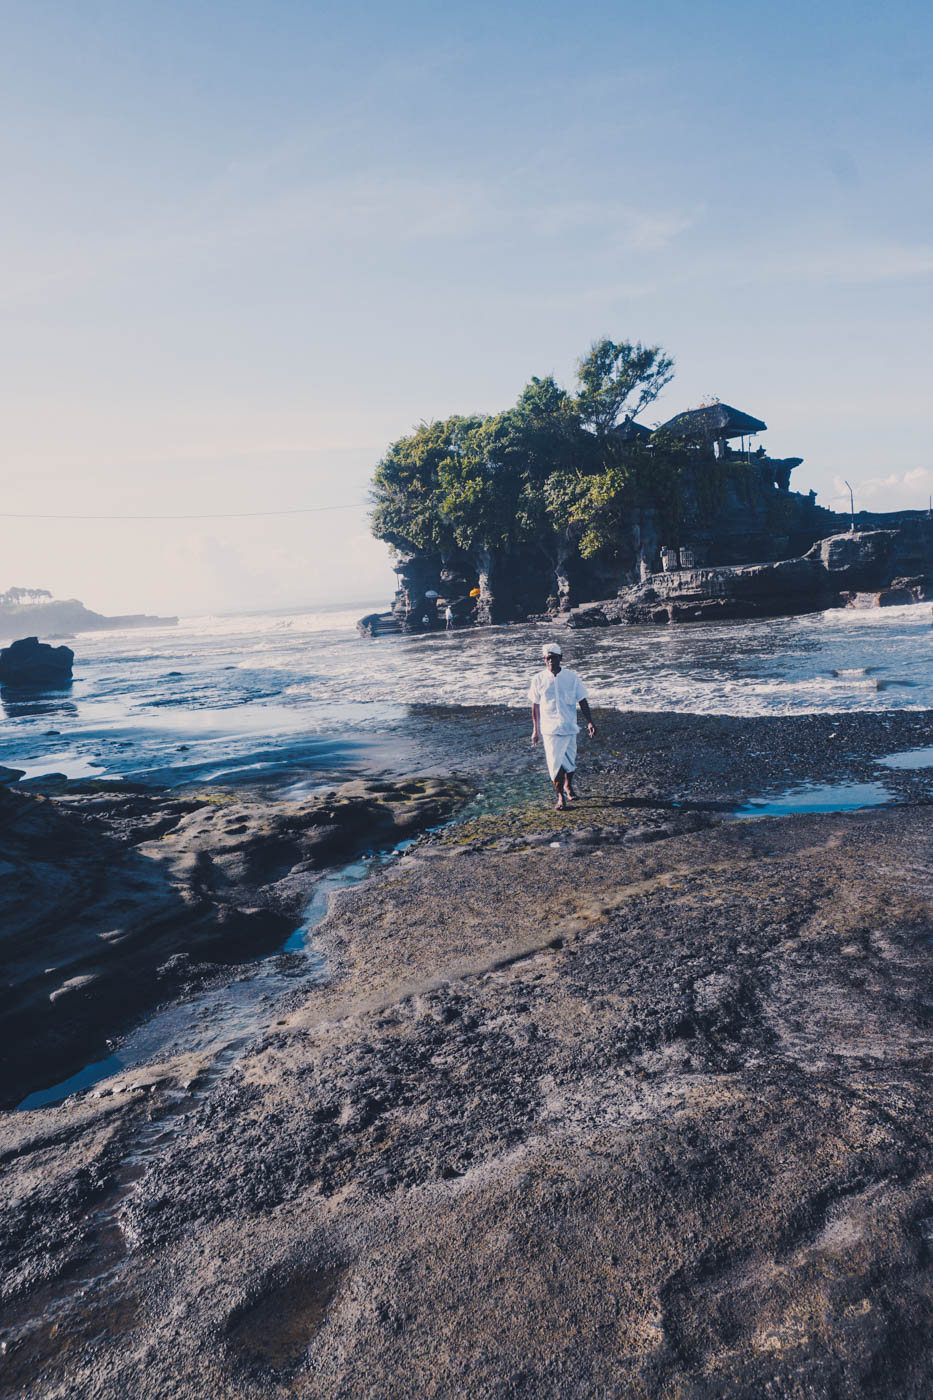 Tanah Lot Holy Sea Temple - Best Things to do in Bali. Beautiful beaches, gorgeous fashion and cultural Ubud #bali #traveldestinations #bucketlist #wanderlust